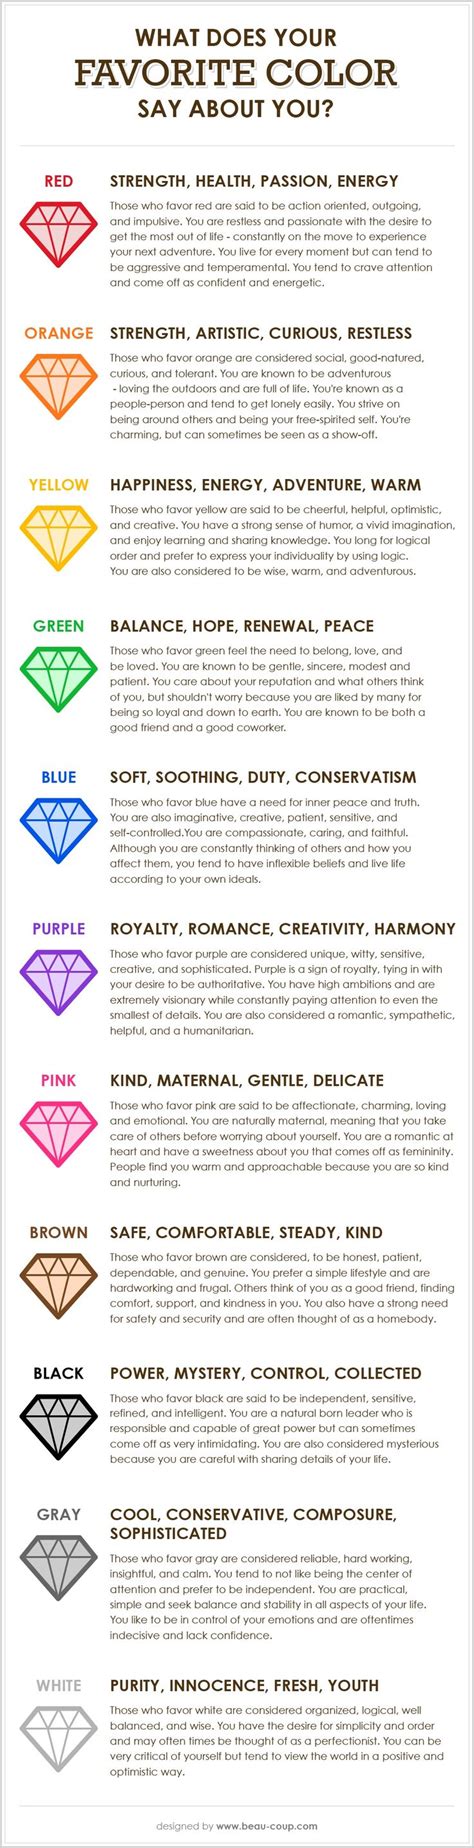 What Does Your Favorite Color Say About You Color Meanings Color Psychology Psychology